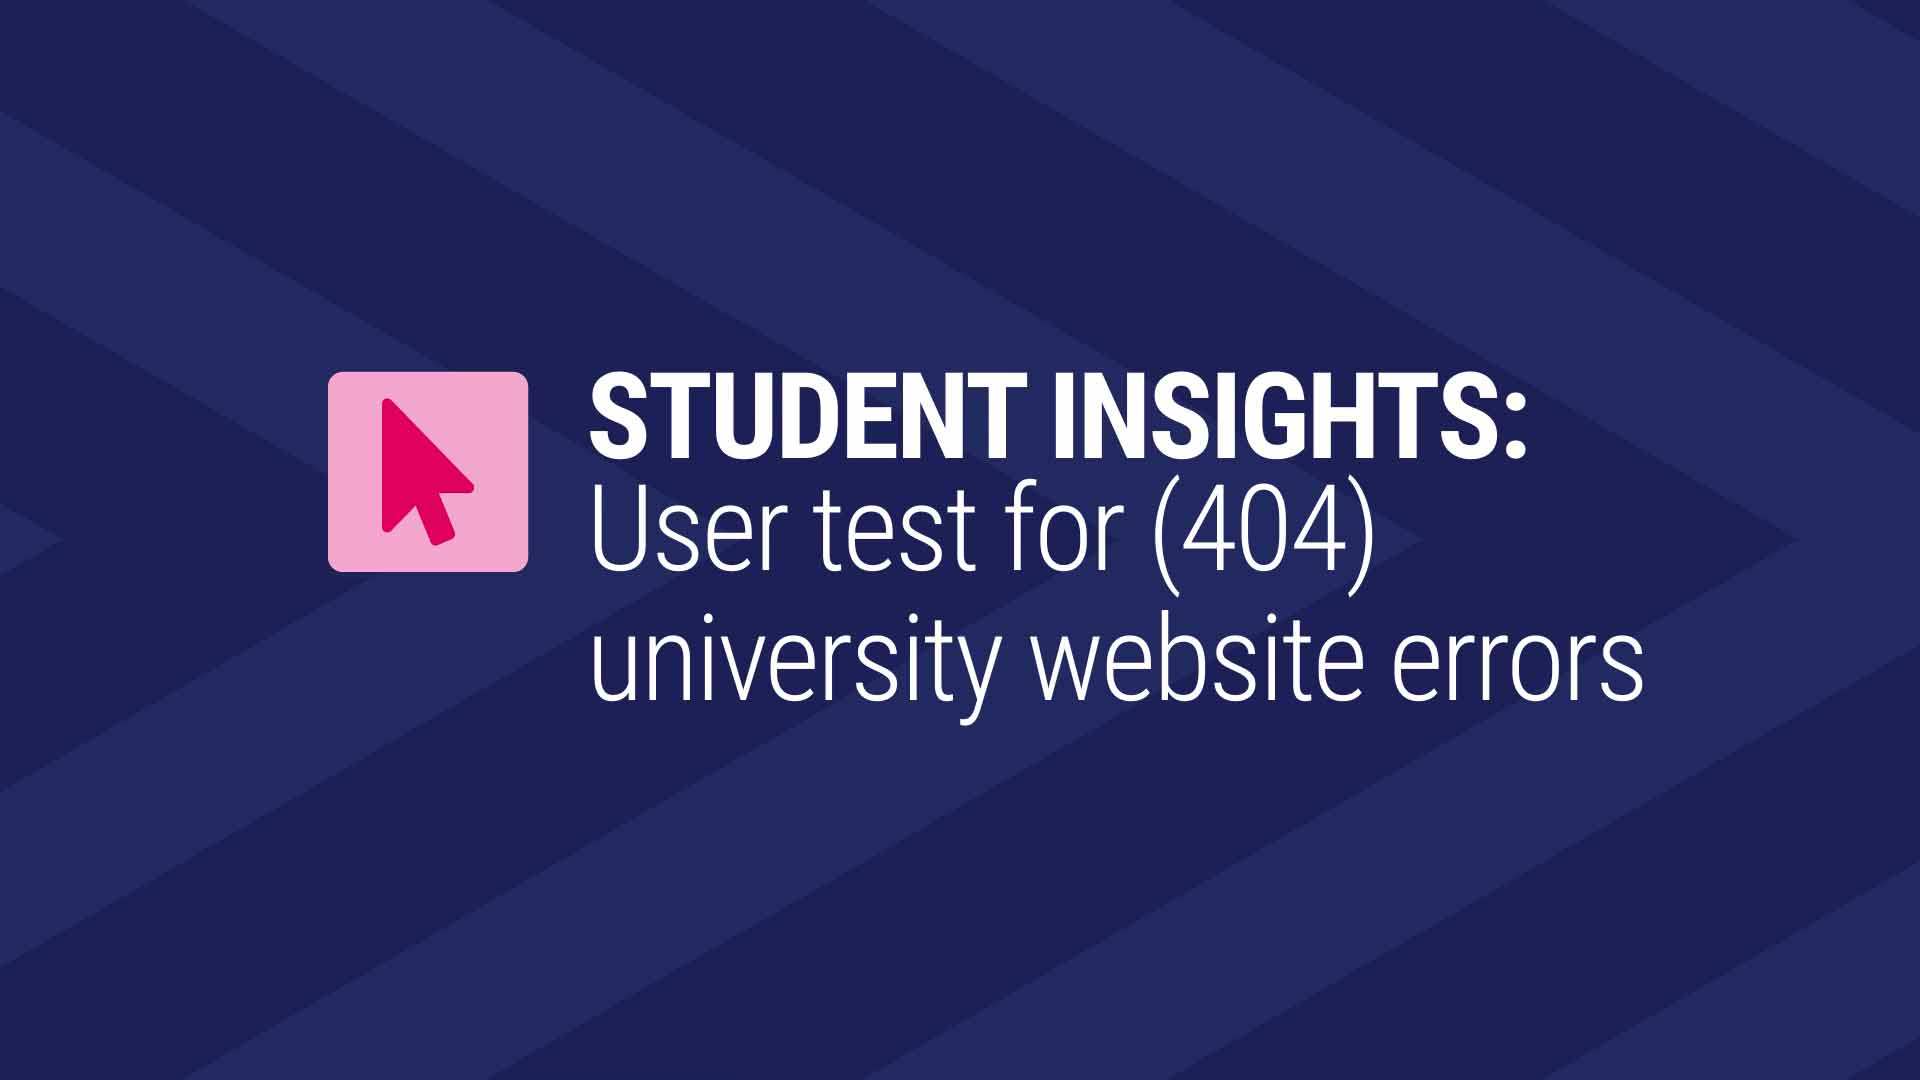 Card image for "24 - Student Insights: Test 404 Error"